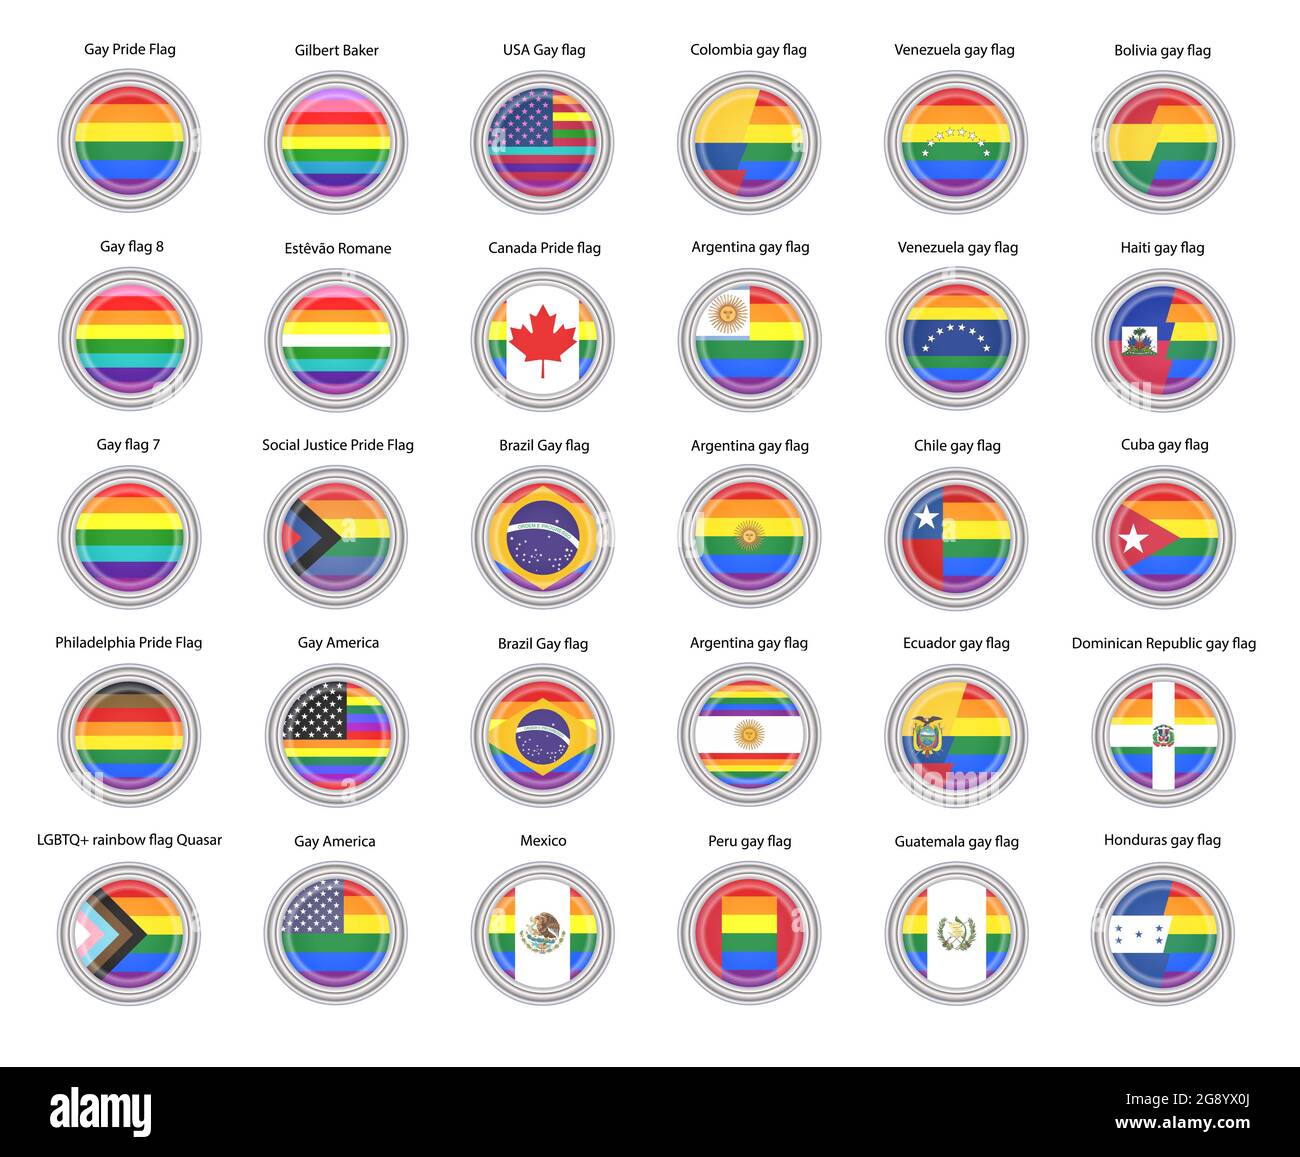 Set of vector icons. Rainbow flags (LGBTQ) and gay flags of countries of the Americas. Stock Photo